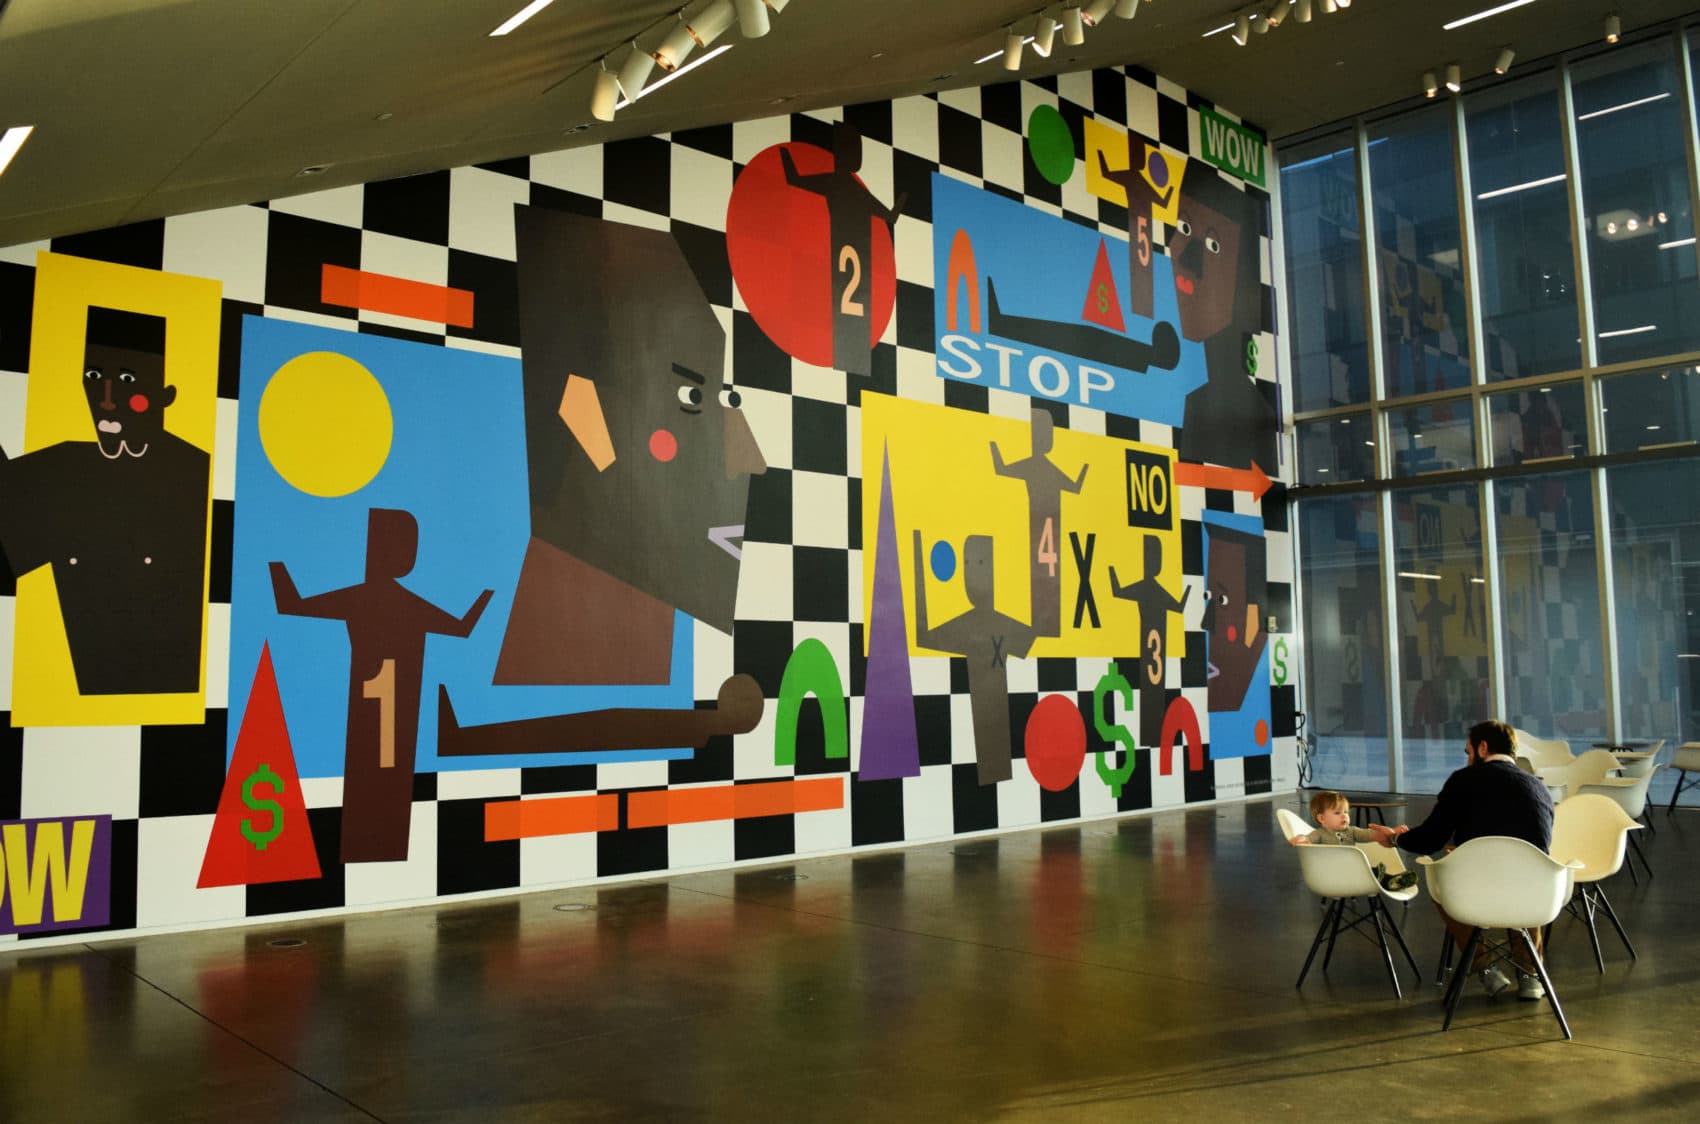 Using The Language Of Symbols, Nina Chanel Abney's New Mural At